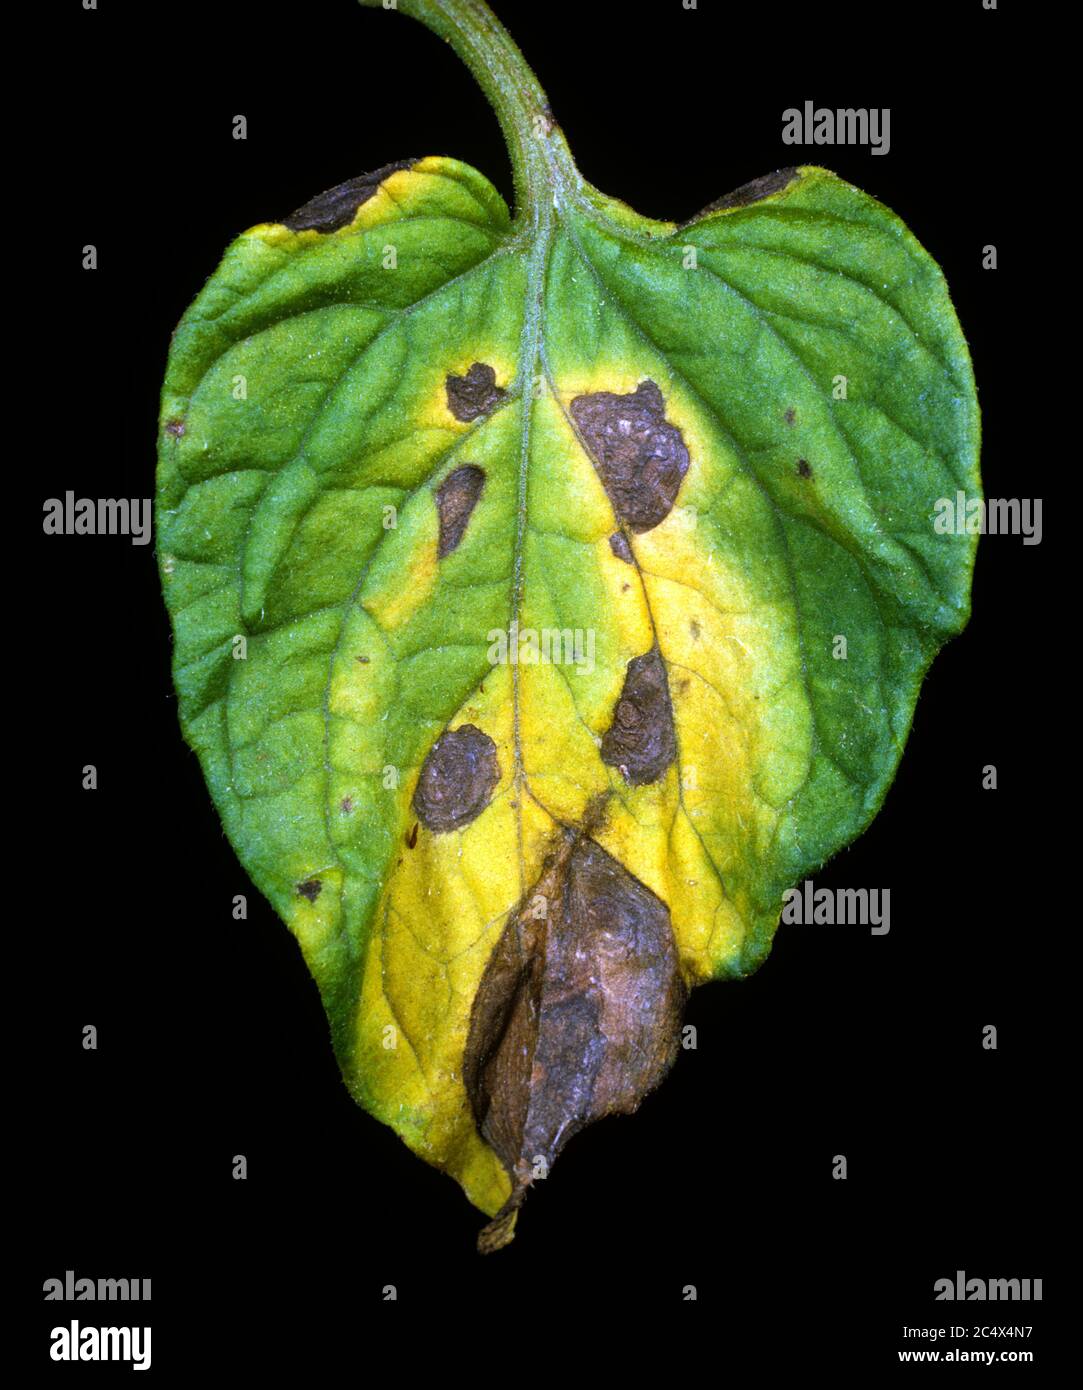 Early blight or target spot (Alternaria solani) discreet necrotic lesions and some chlorosis on a tomato leaflet, New York, USA, May. Stock Photo